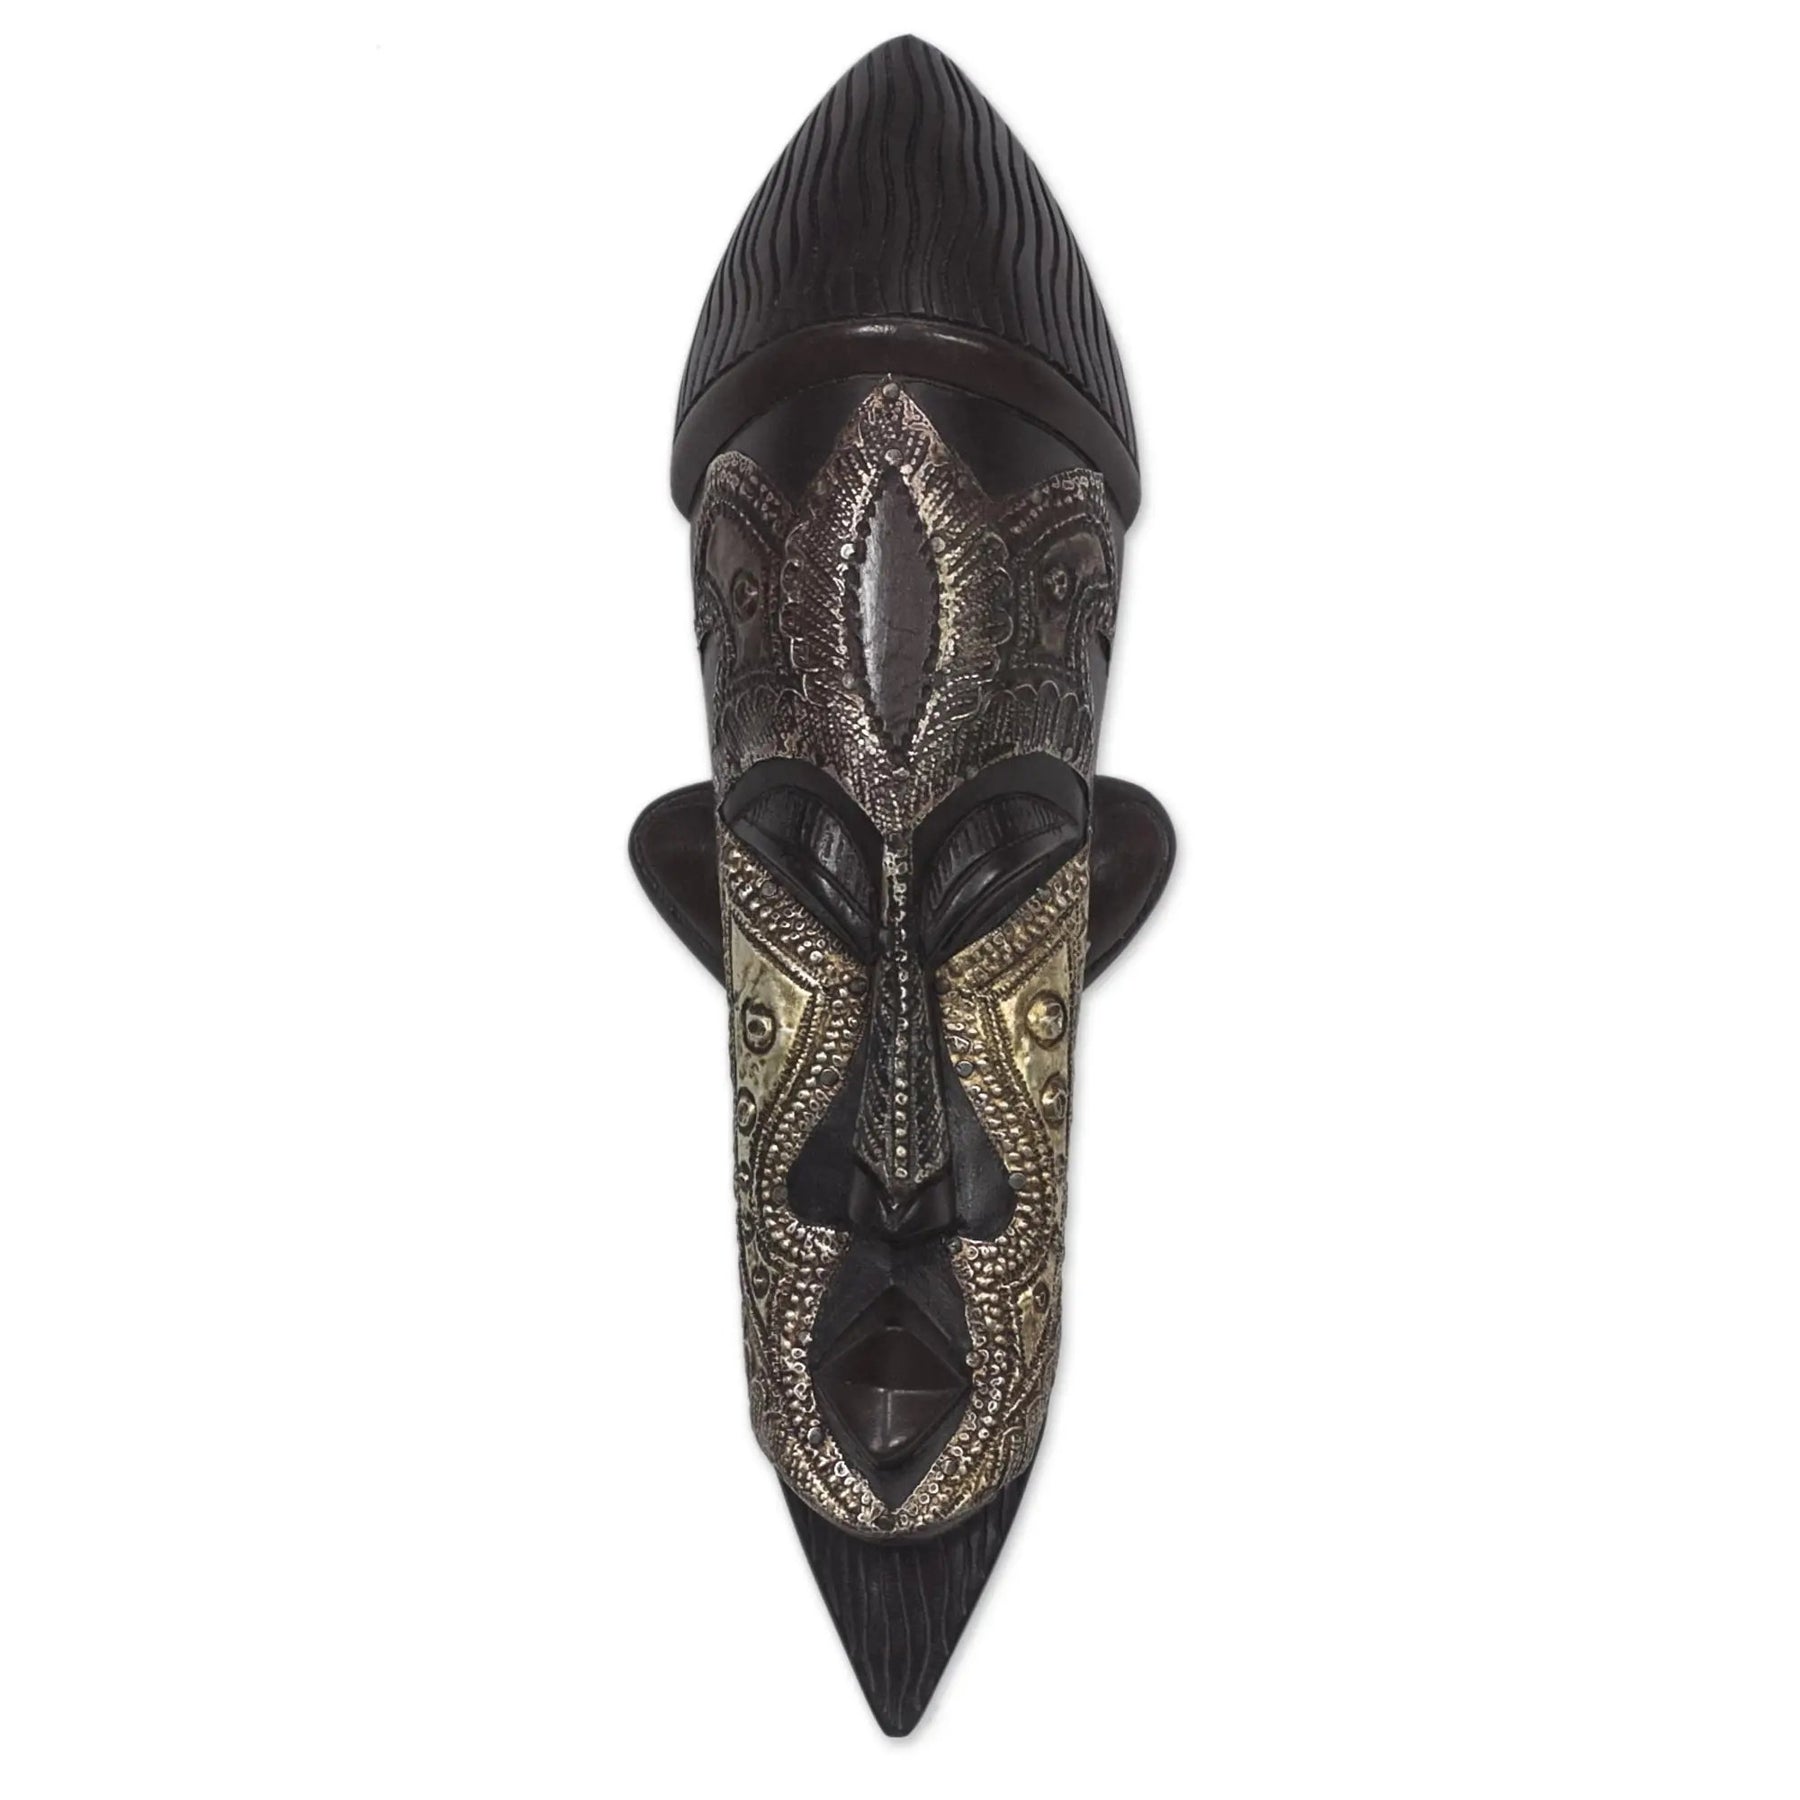 1 of 5: Have Patience: Authentic Handmade West African Mask by Winfred Okoampah